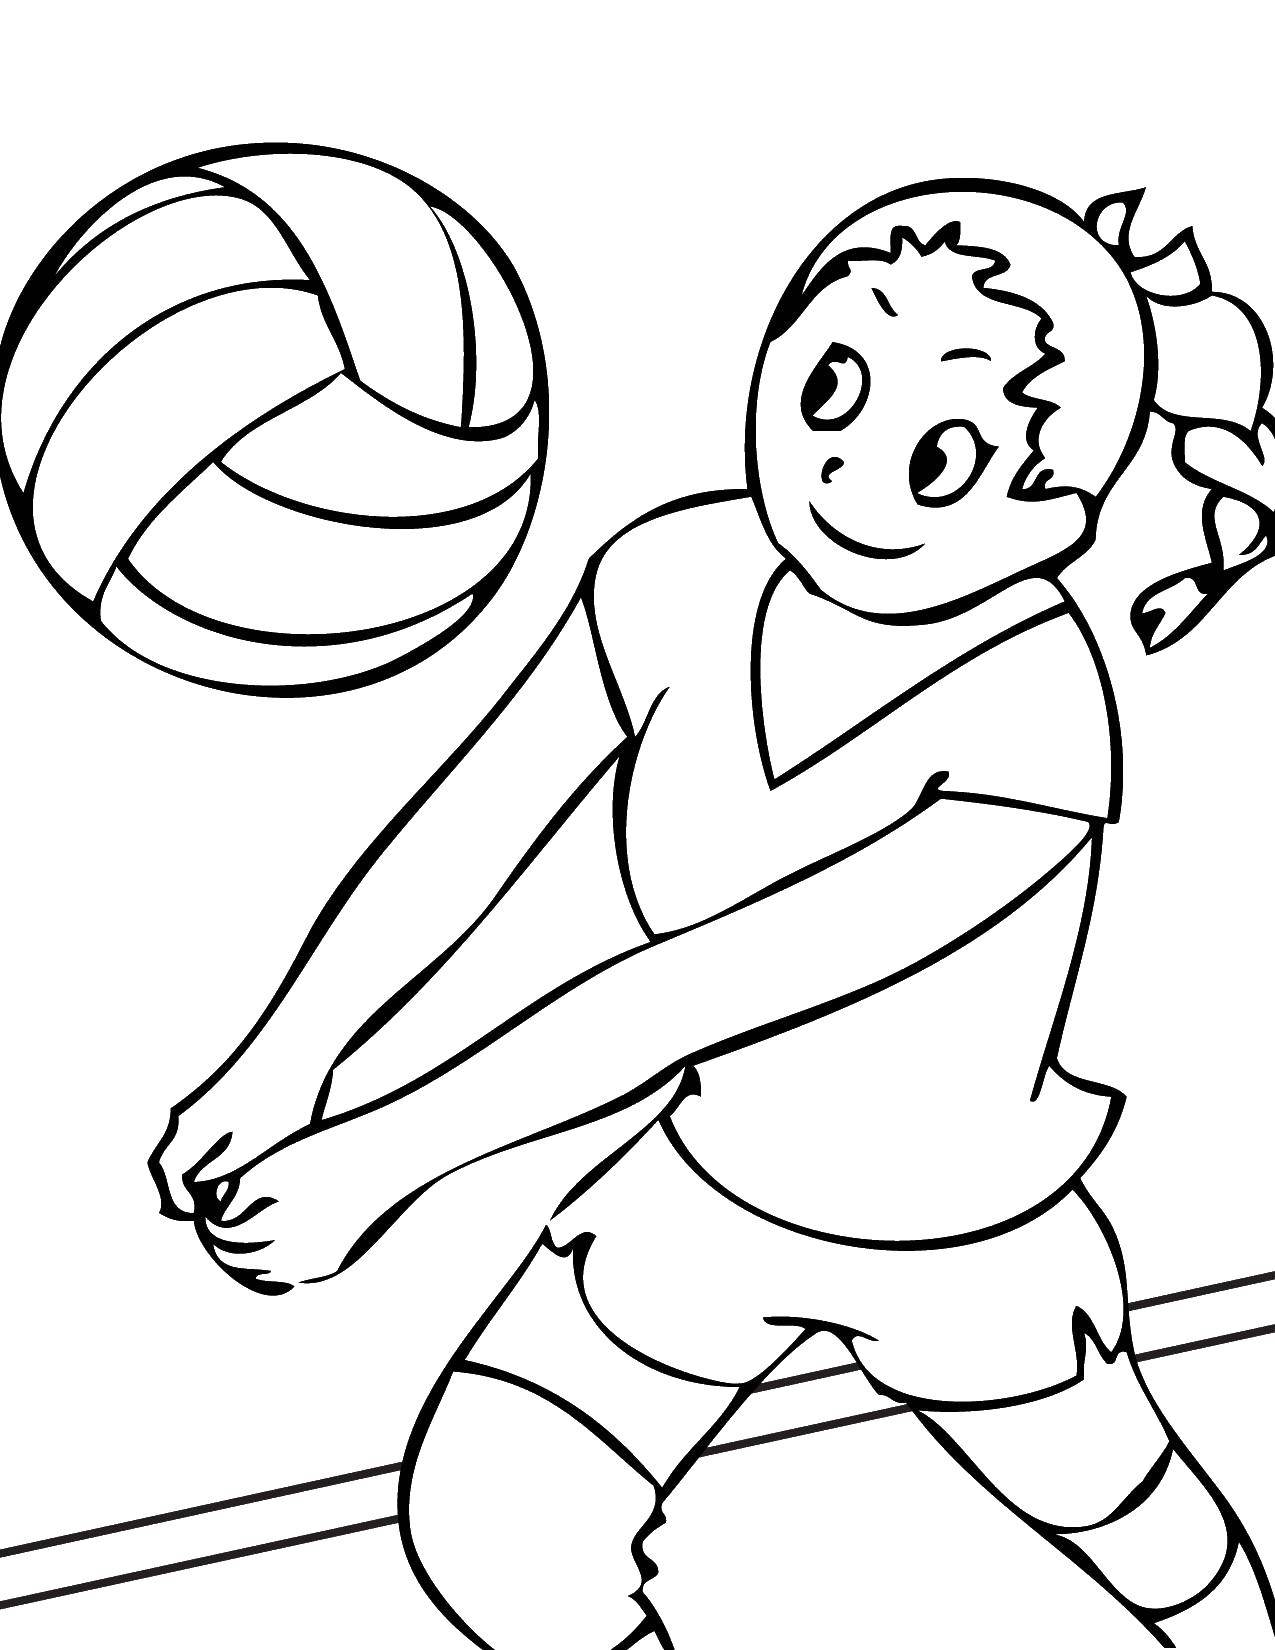 Coloring Girl volleyball player. Category Sports. Tags:  girl, ball, volleyball.